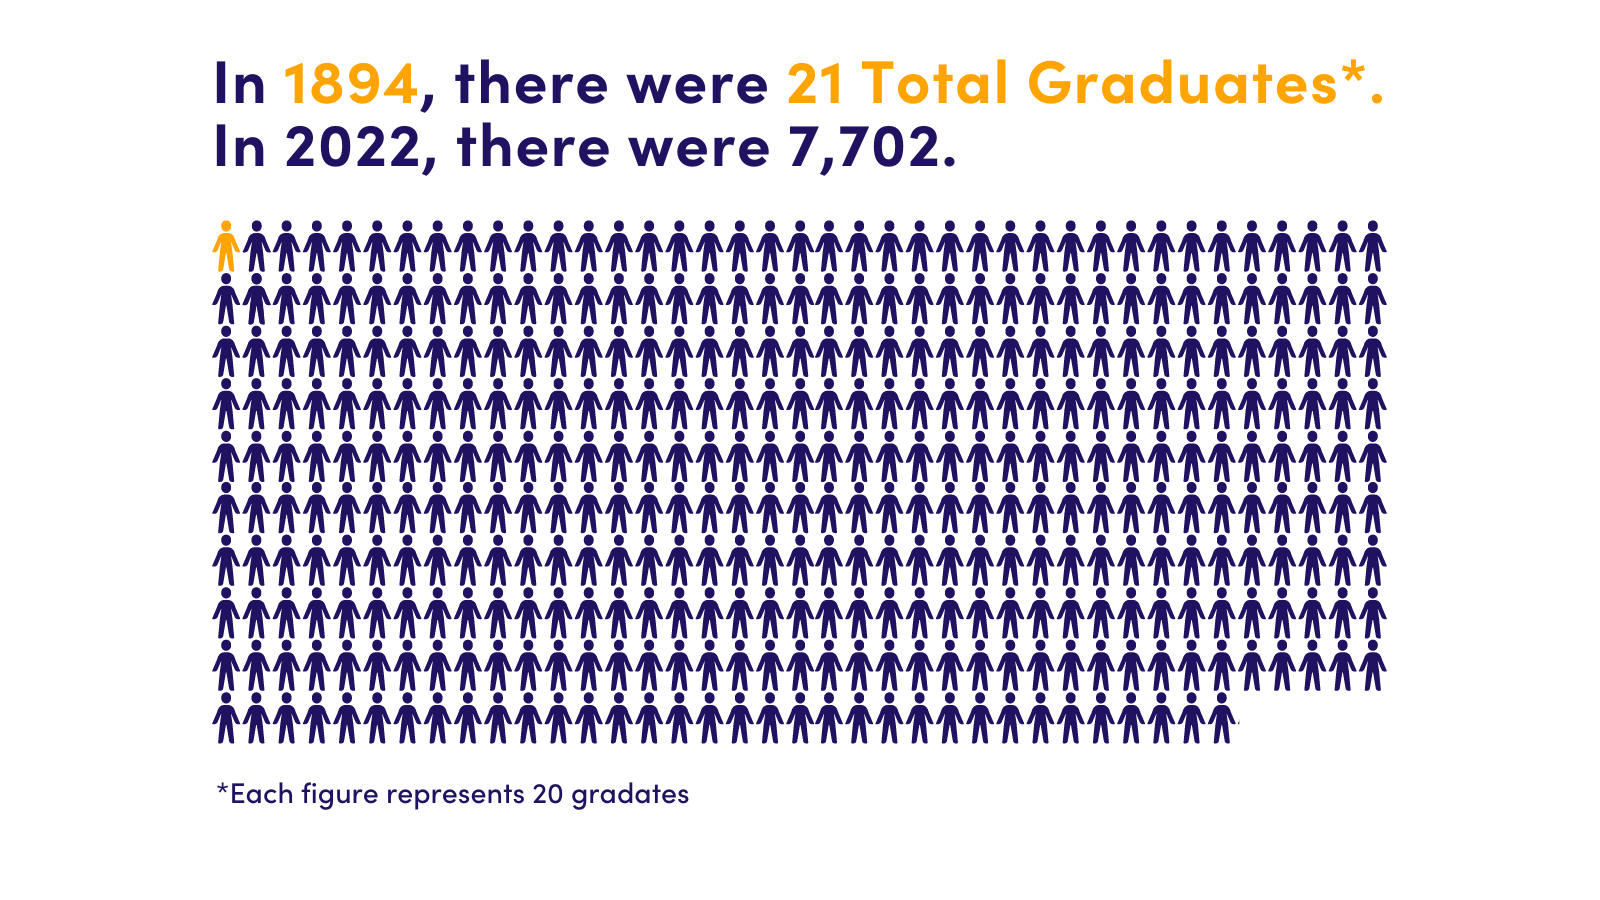 Graph comparing 21 Total Graduates  1894 to 7,702 in 2022